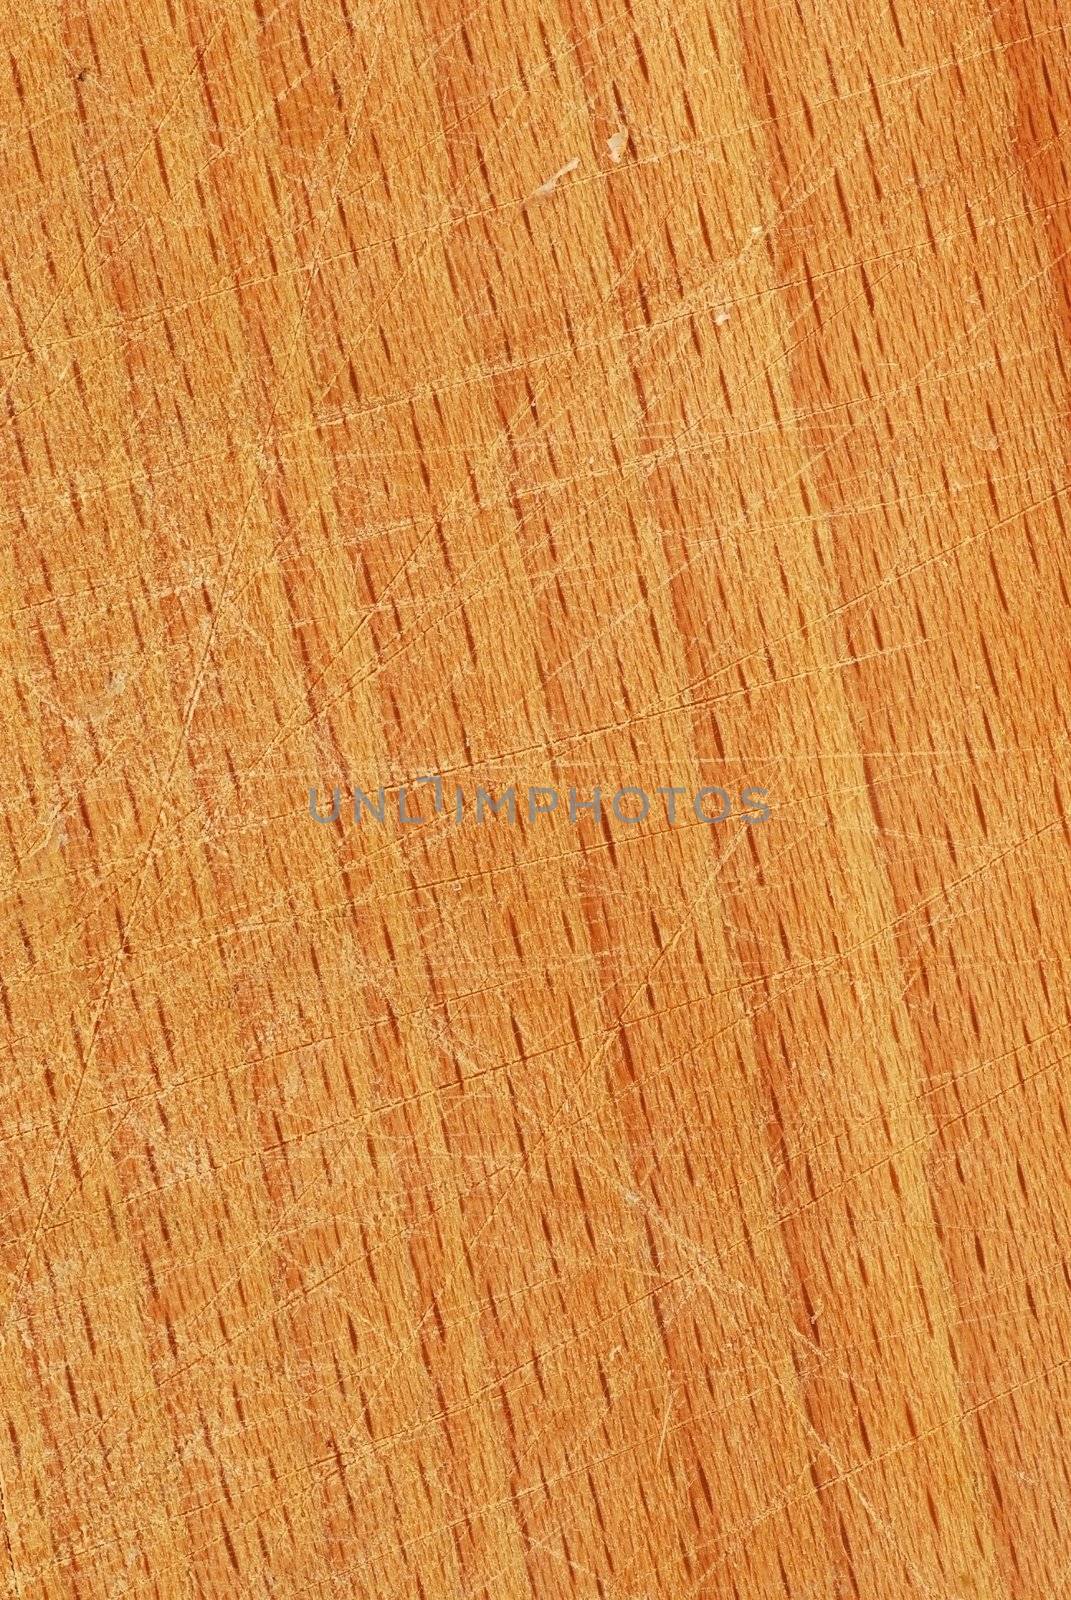 Wooden background by simply